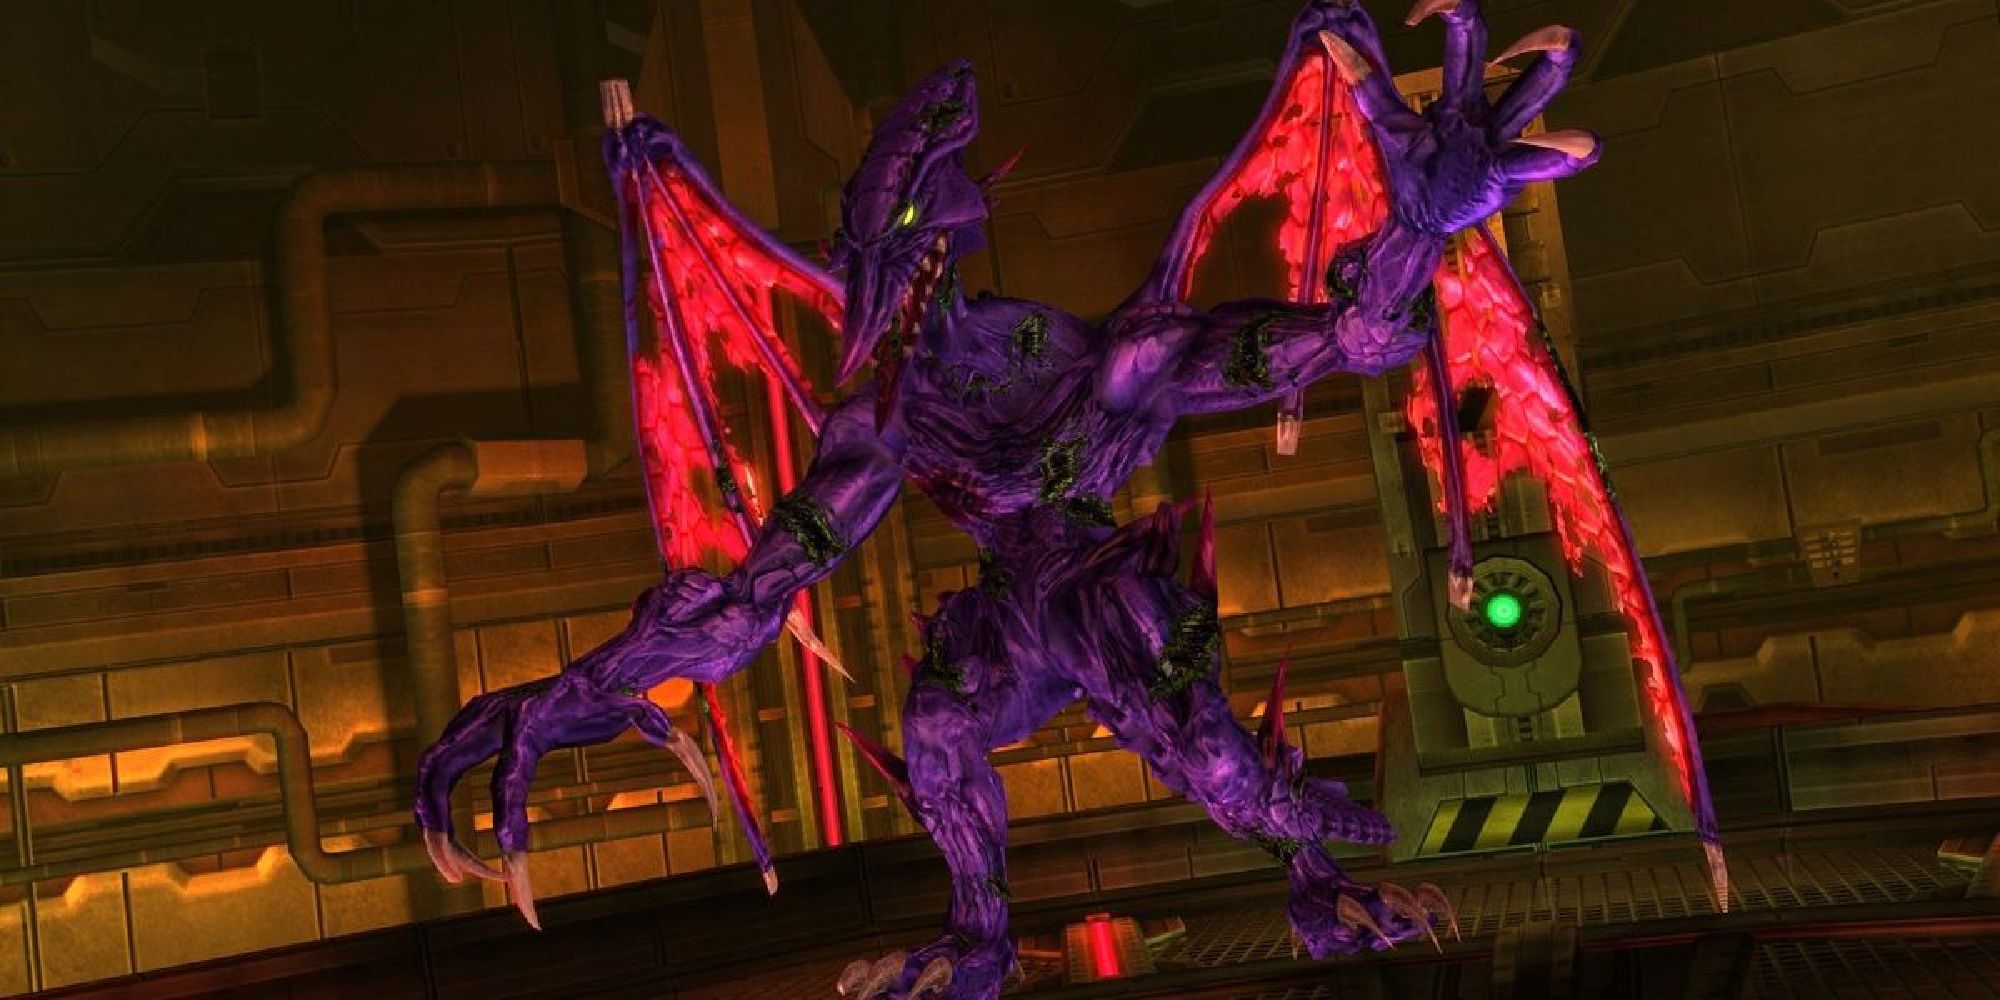 Ridley appearing in Sector 3 of Pyrosphere in Other M to fight Samus